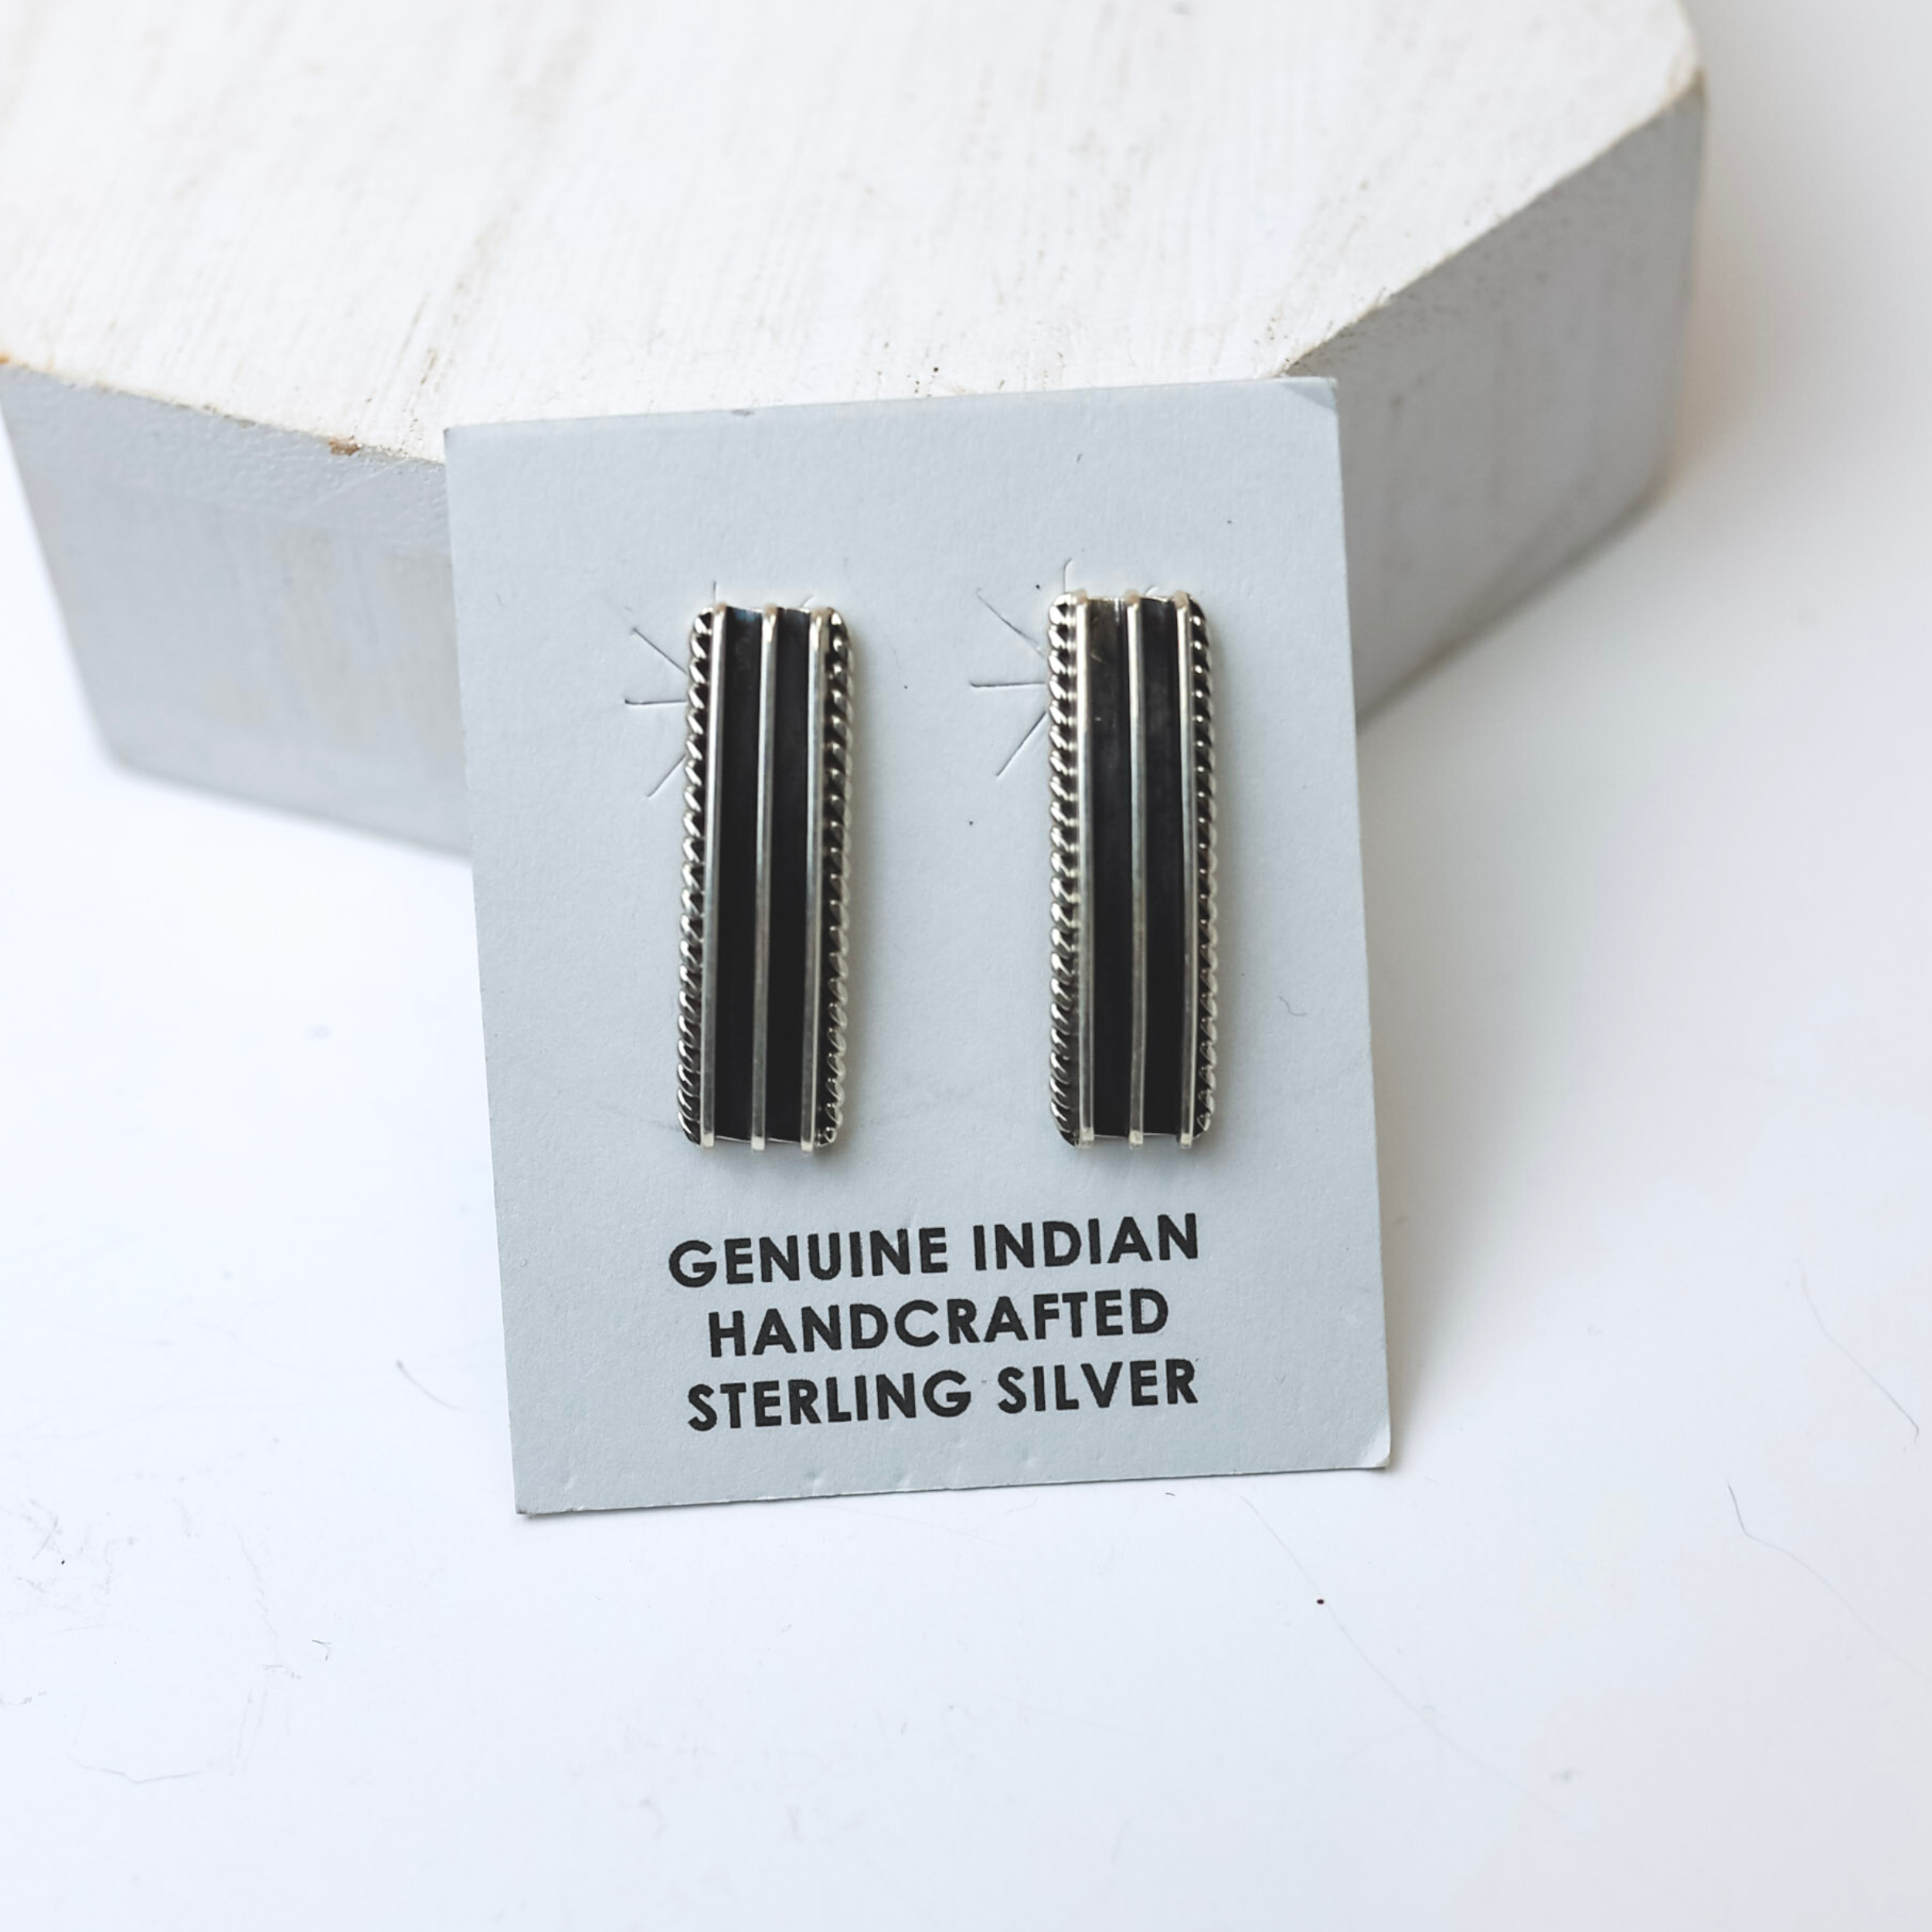 Mark Yazzie Navajo Handmade Sterling Silver Rectangle Post Earrings are centered in the middle of the picture on white background. 